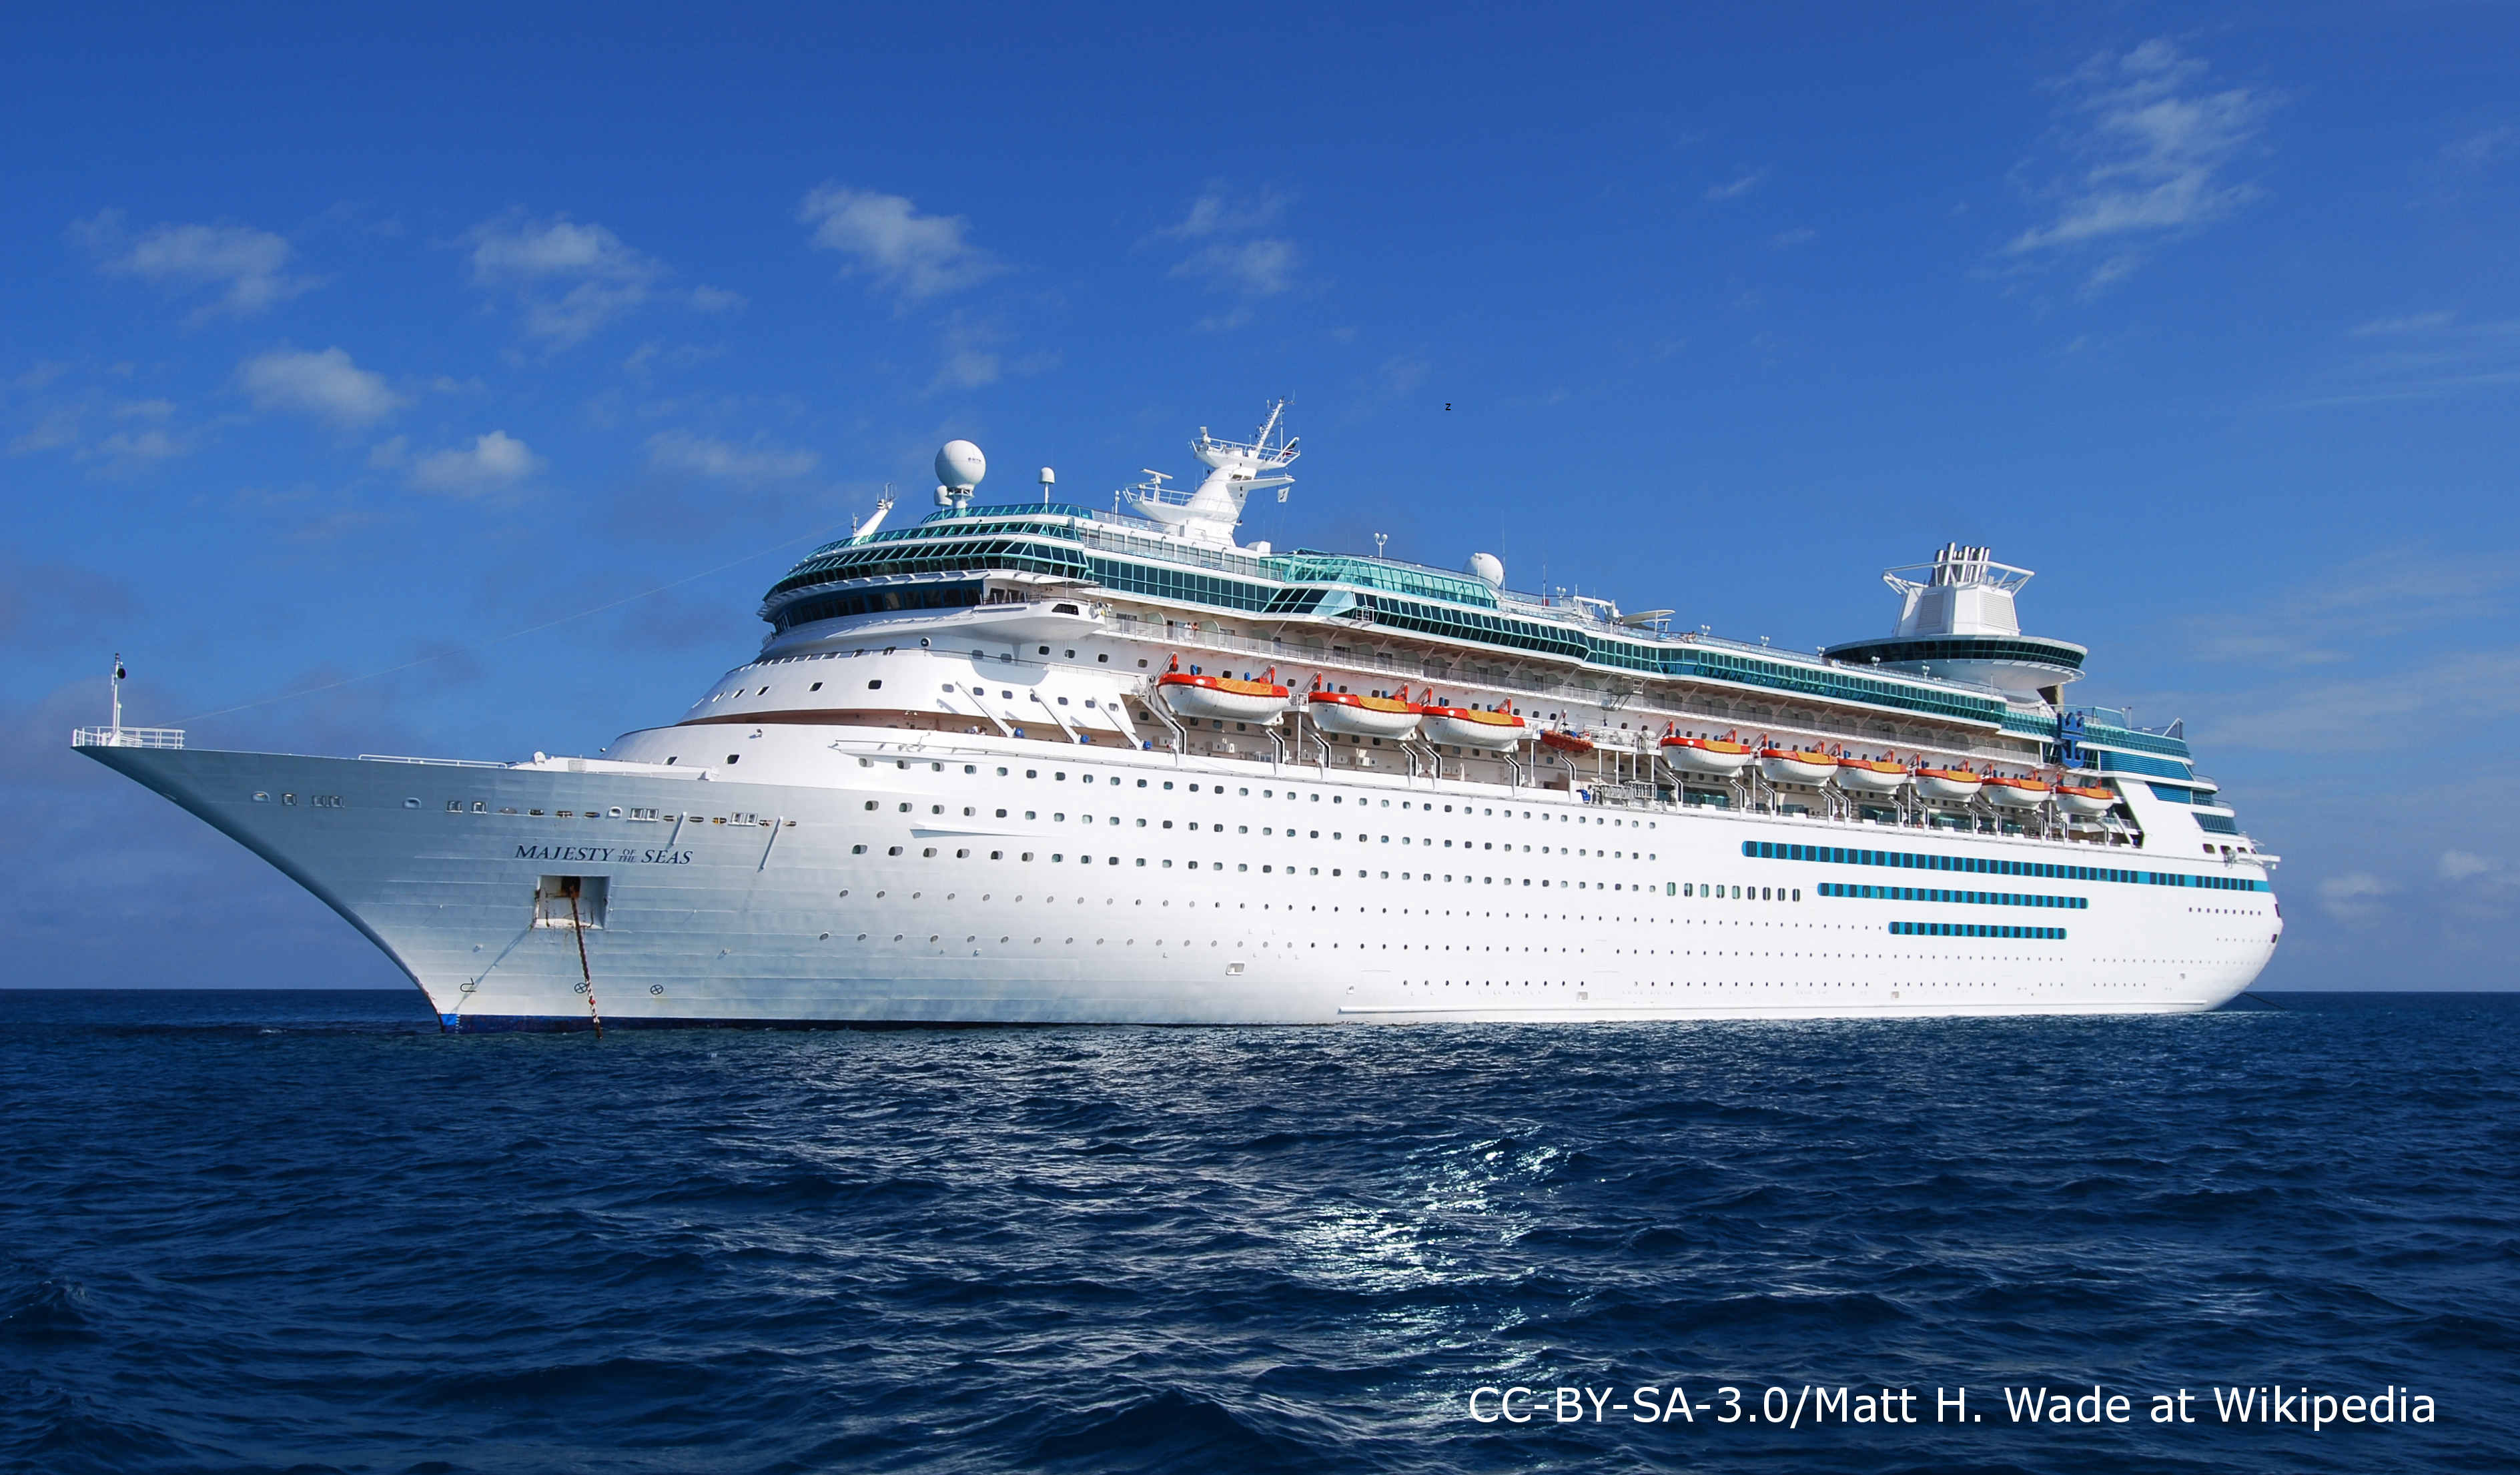 Cruise to Cuba with Royal Carribean’s Majesty of the Seas